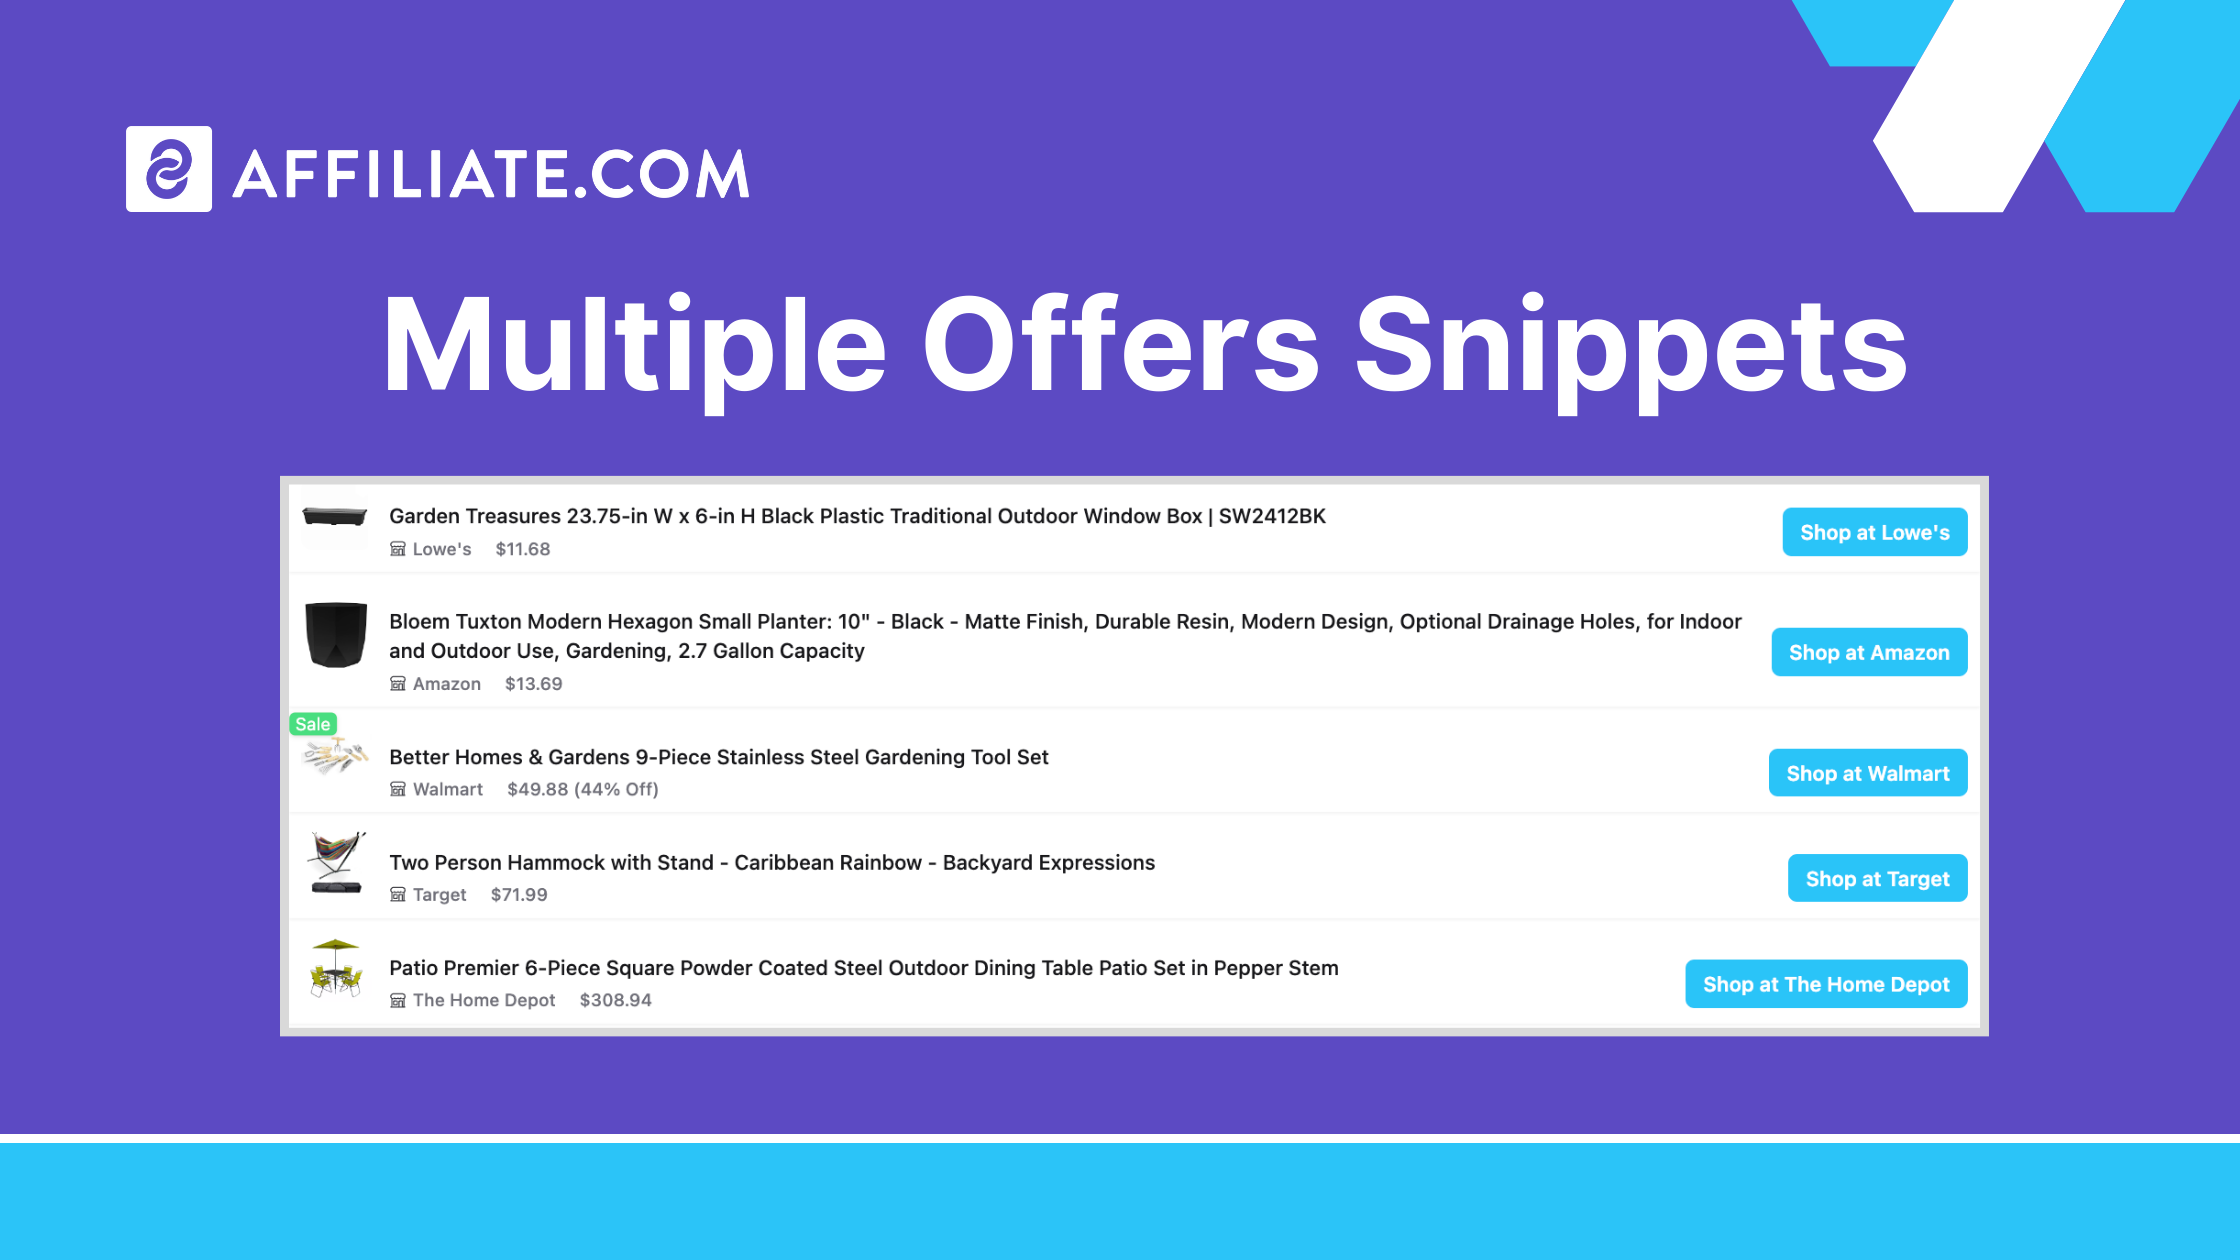 Multiple Offers Snippets